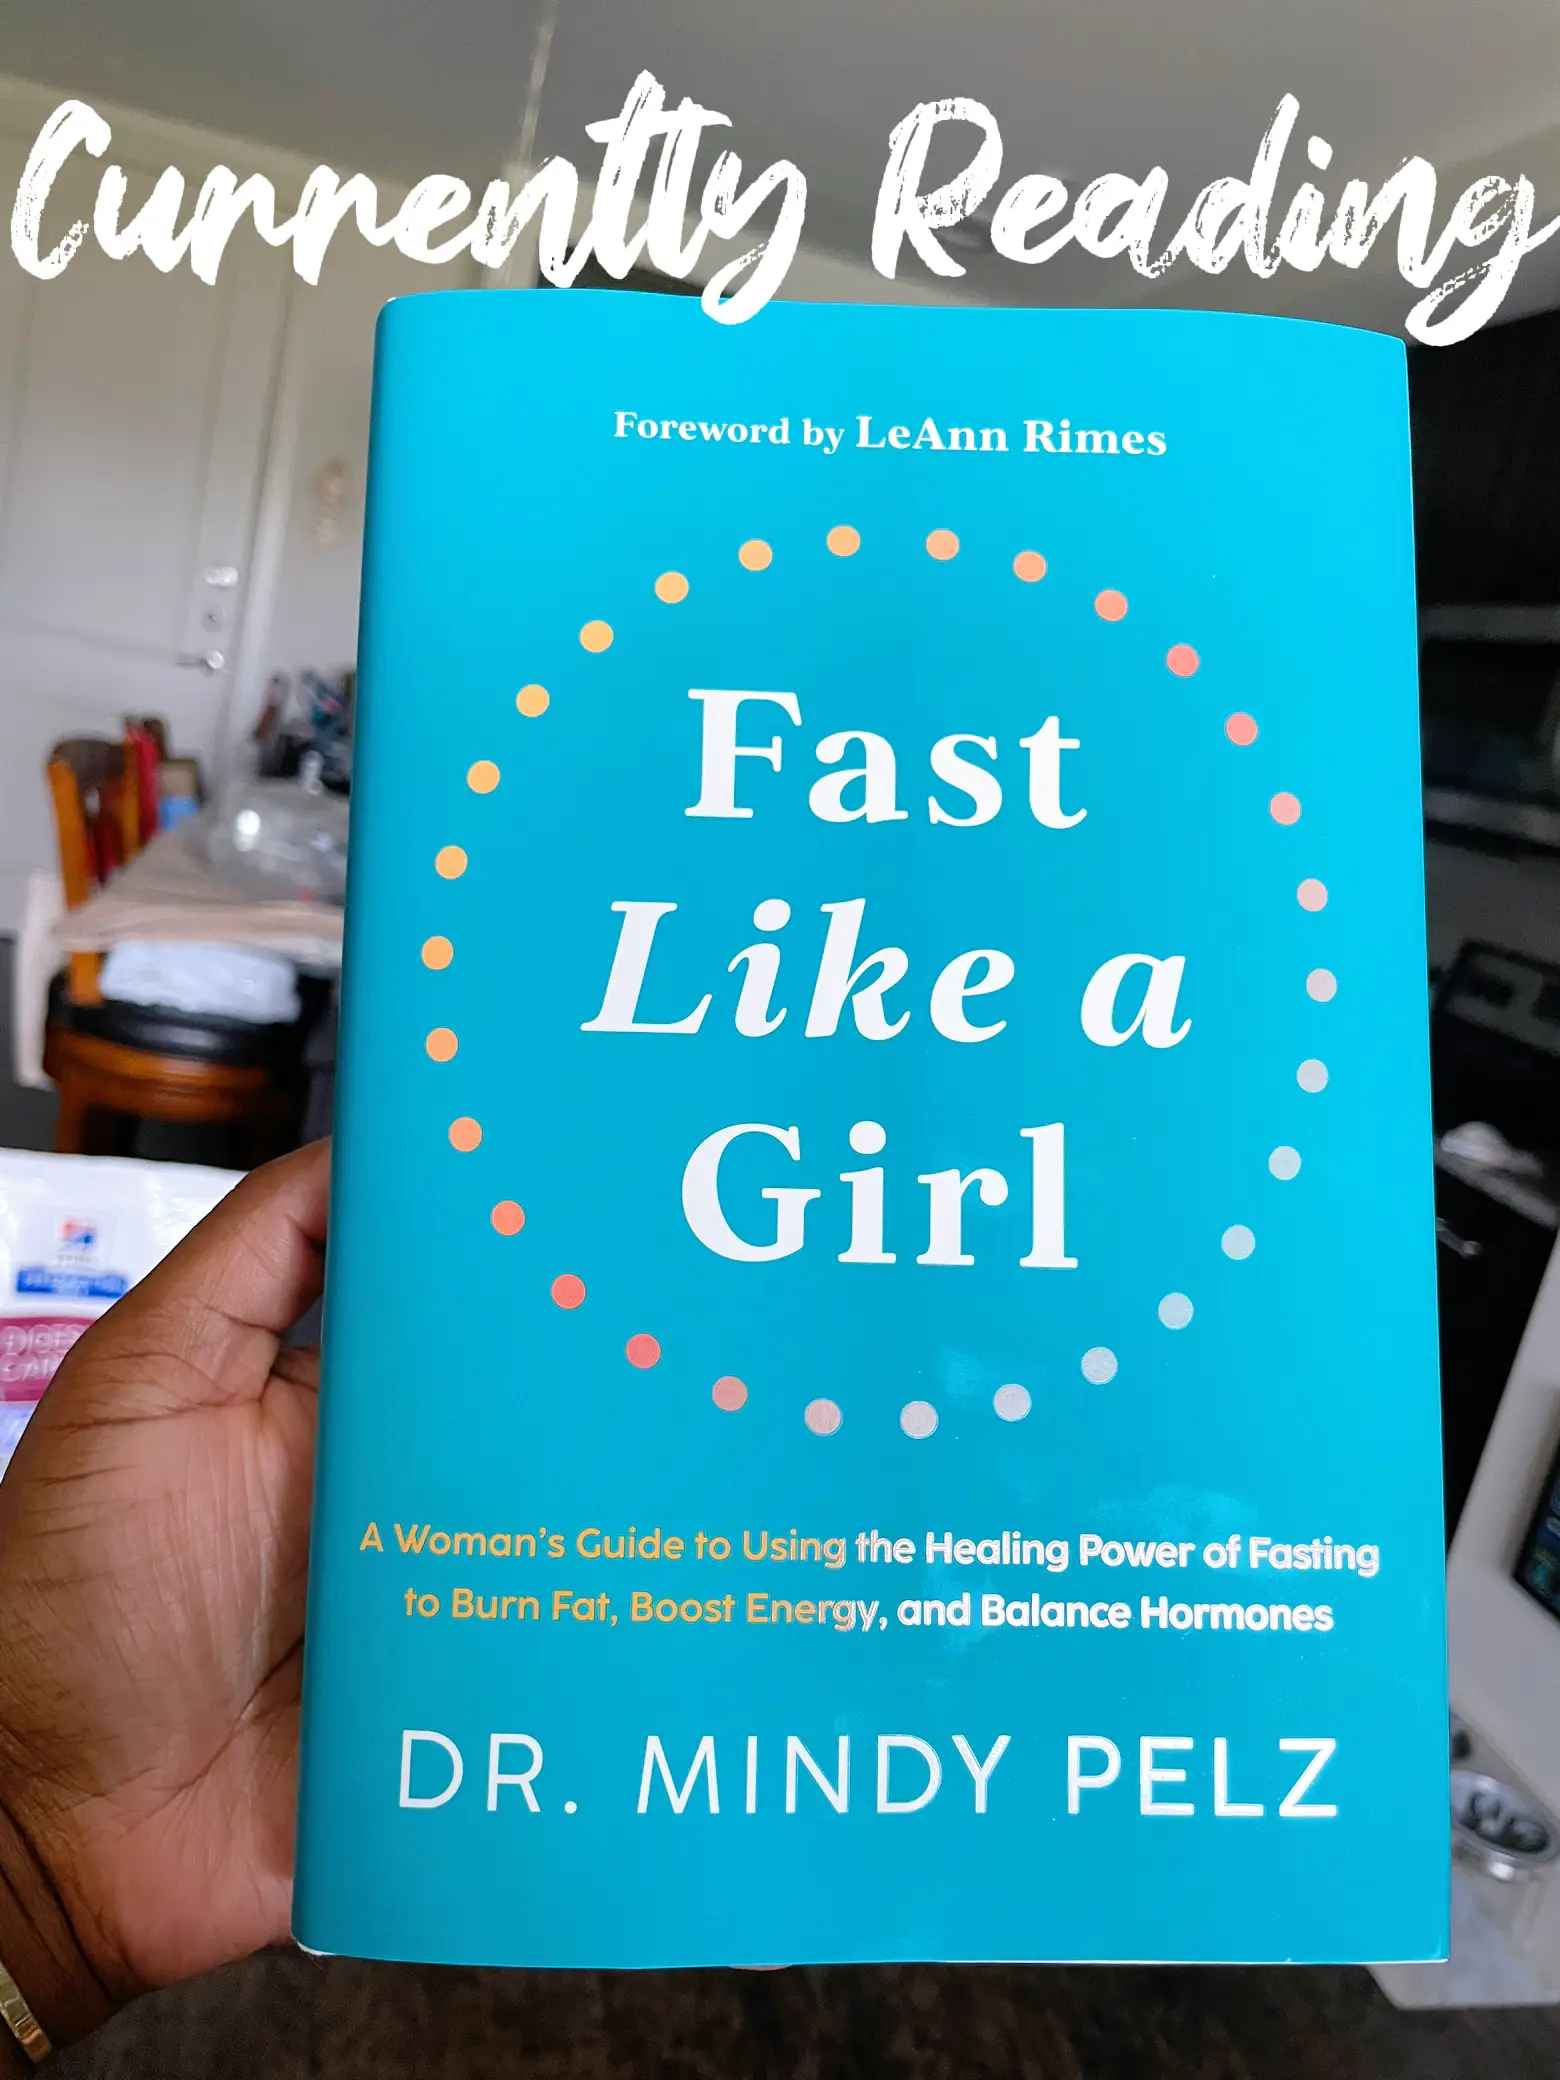 Can you exercise when you fast - Dr. Mindy Pelz